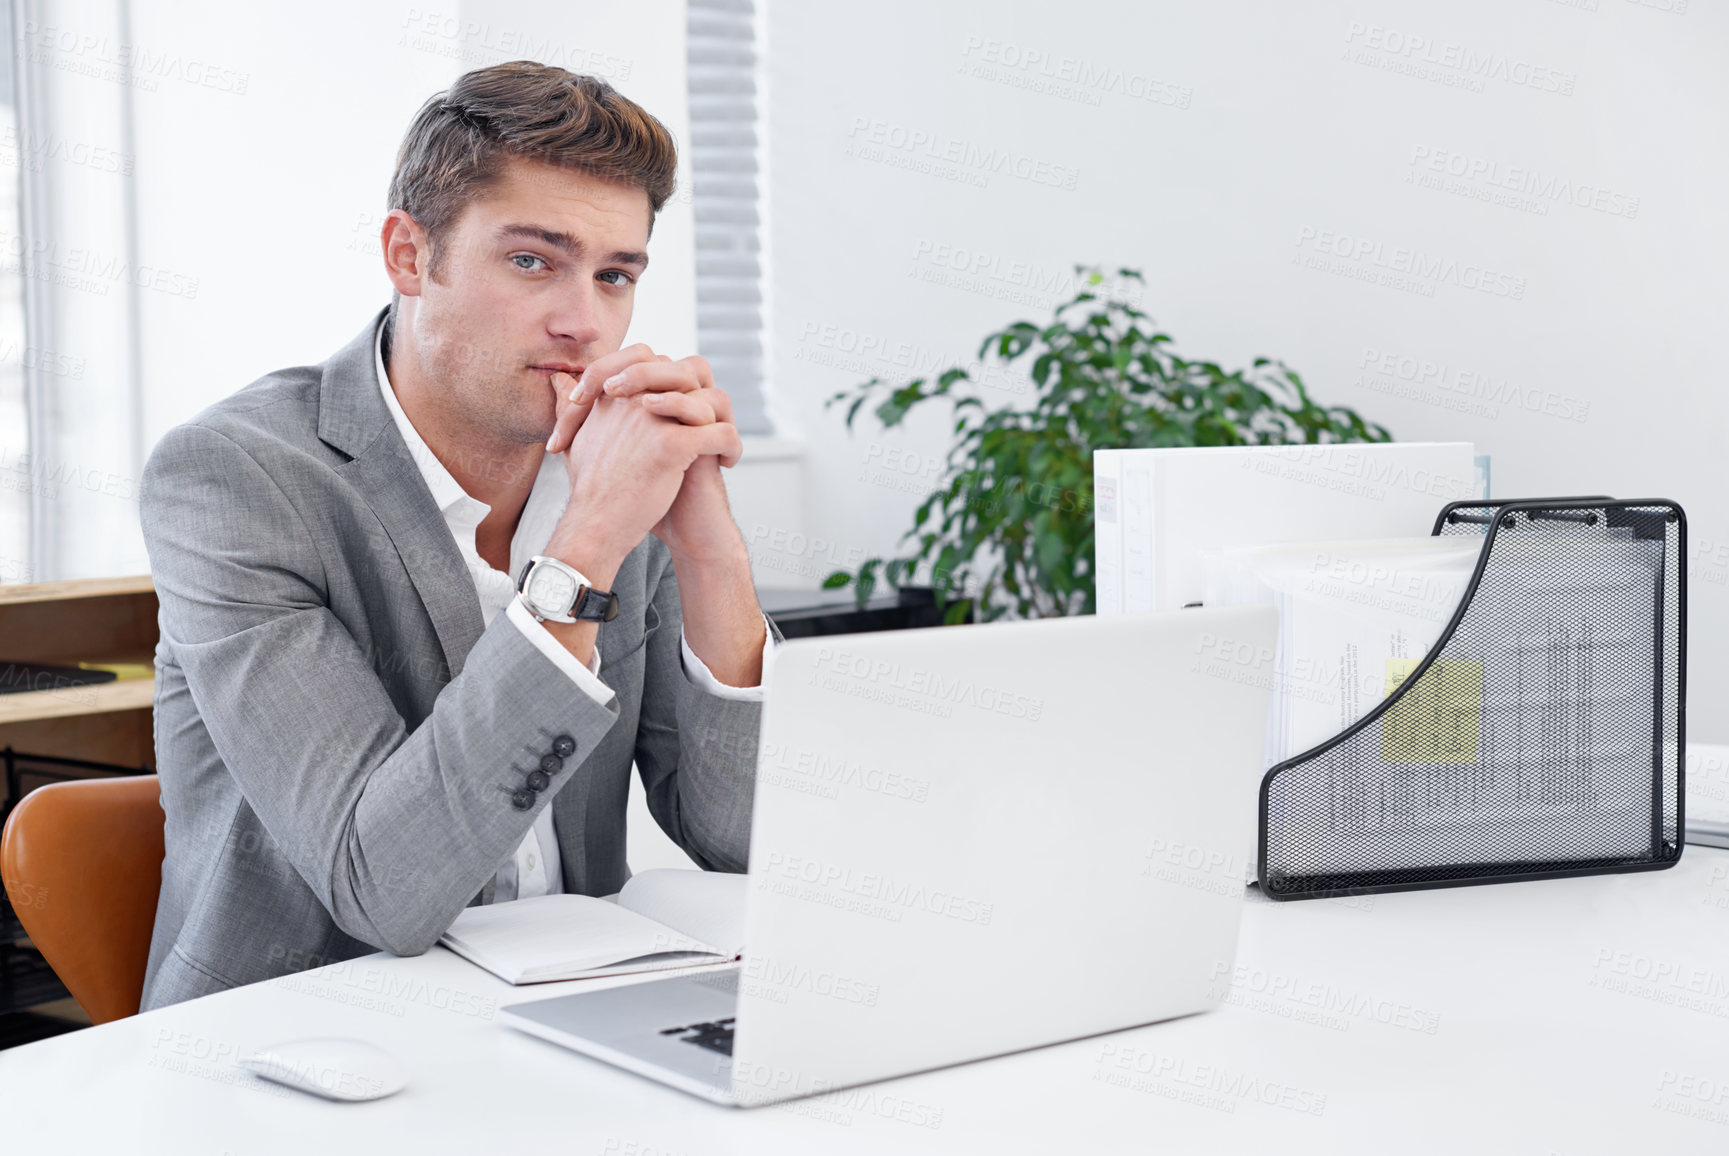 Buy stock photo A serious young businessman sitting at his desk and considering his options